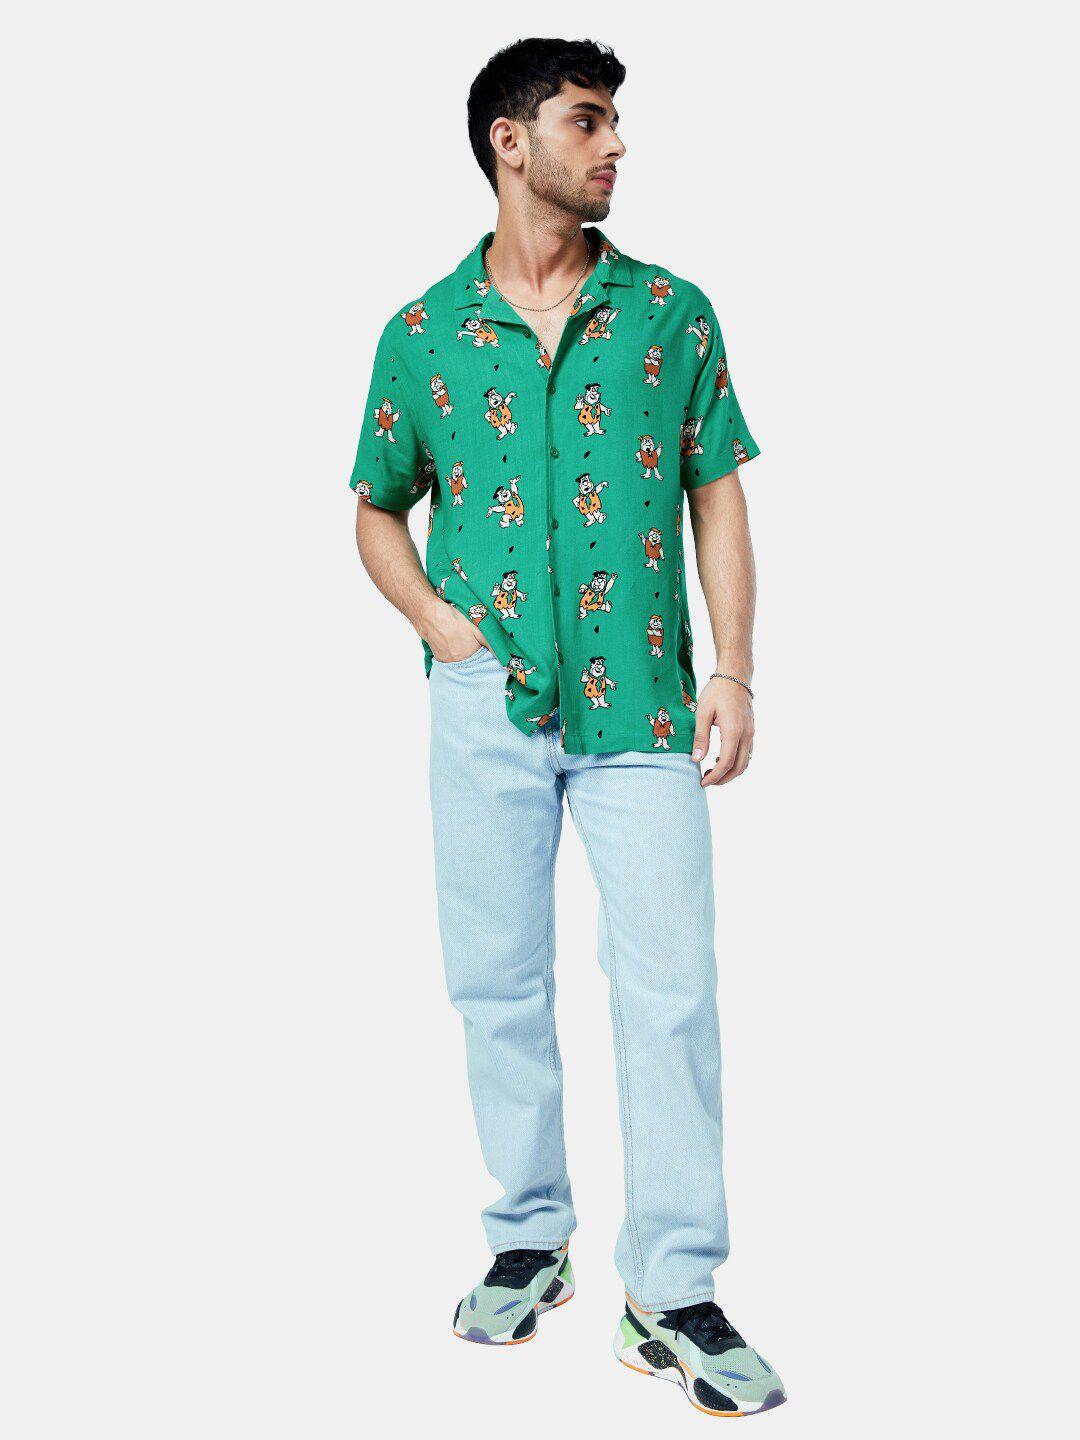 the souled store men green floral printed casual shirt